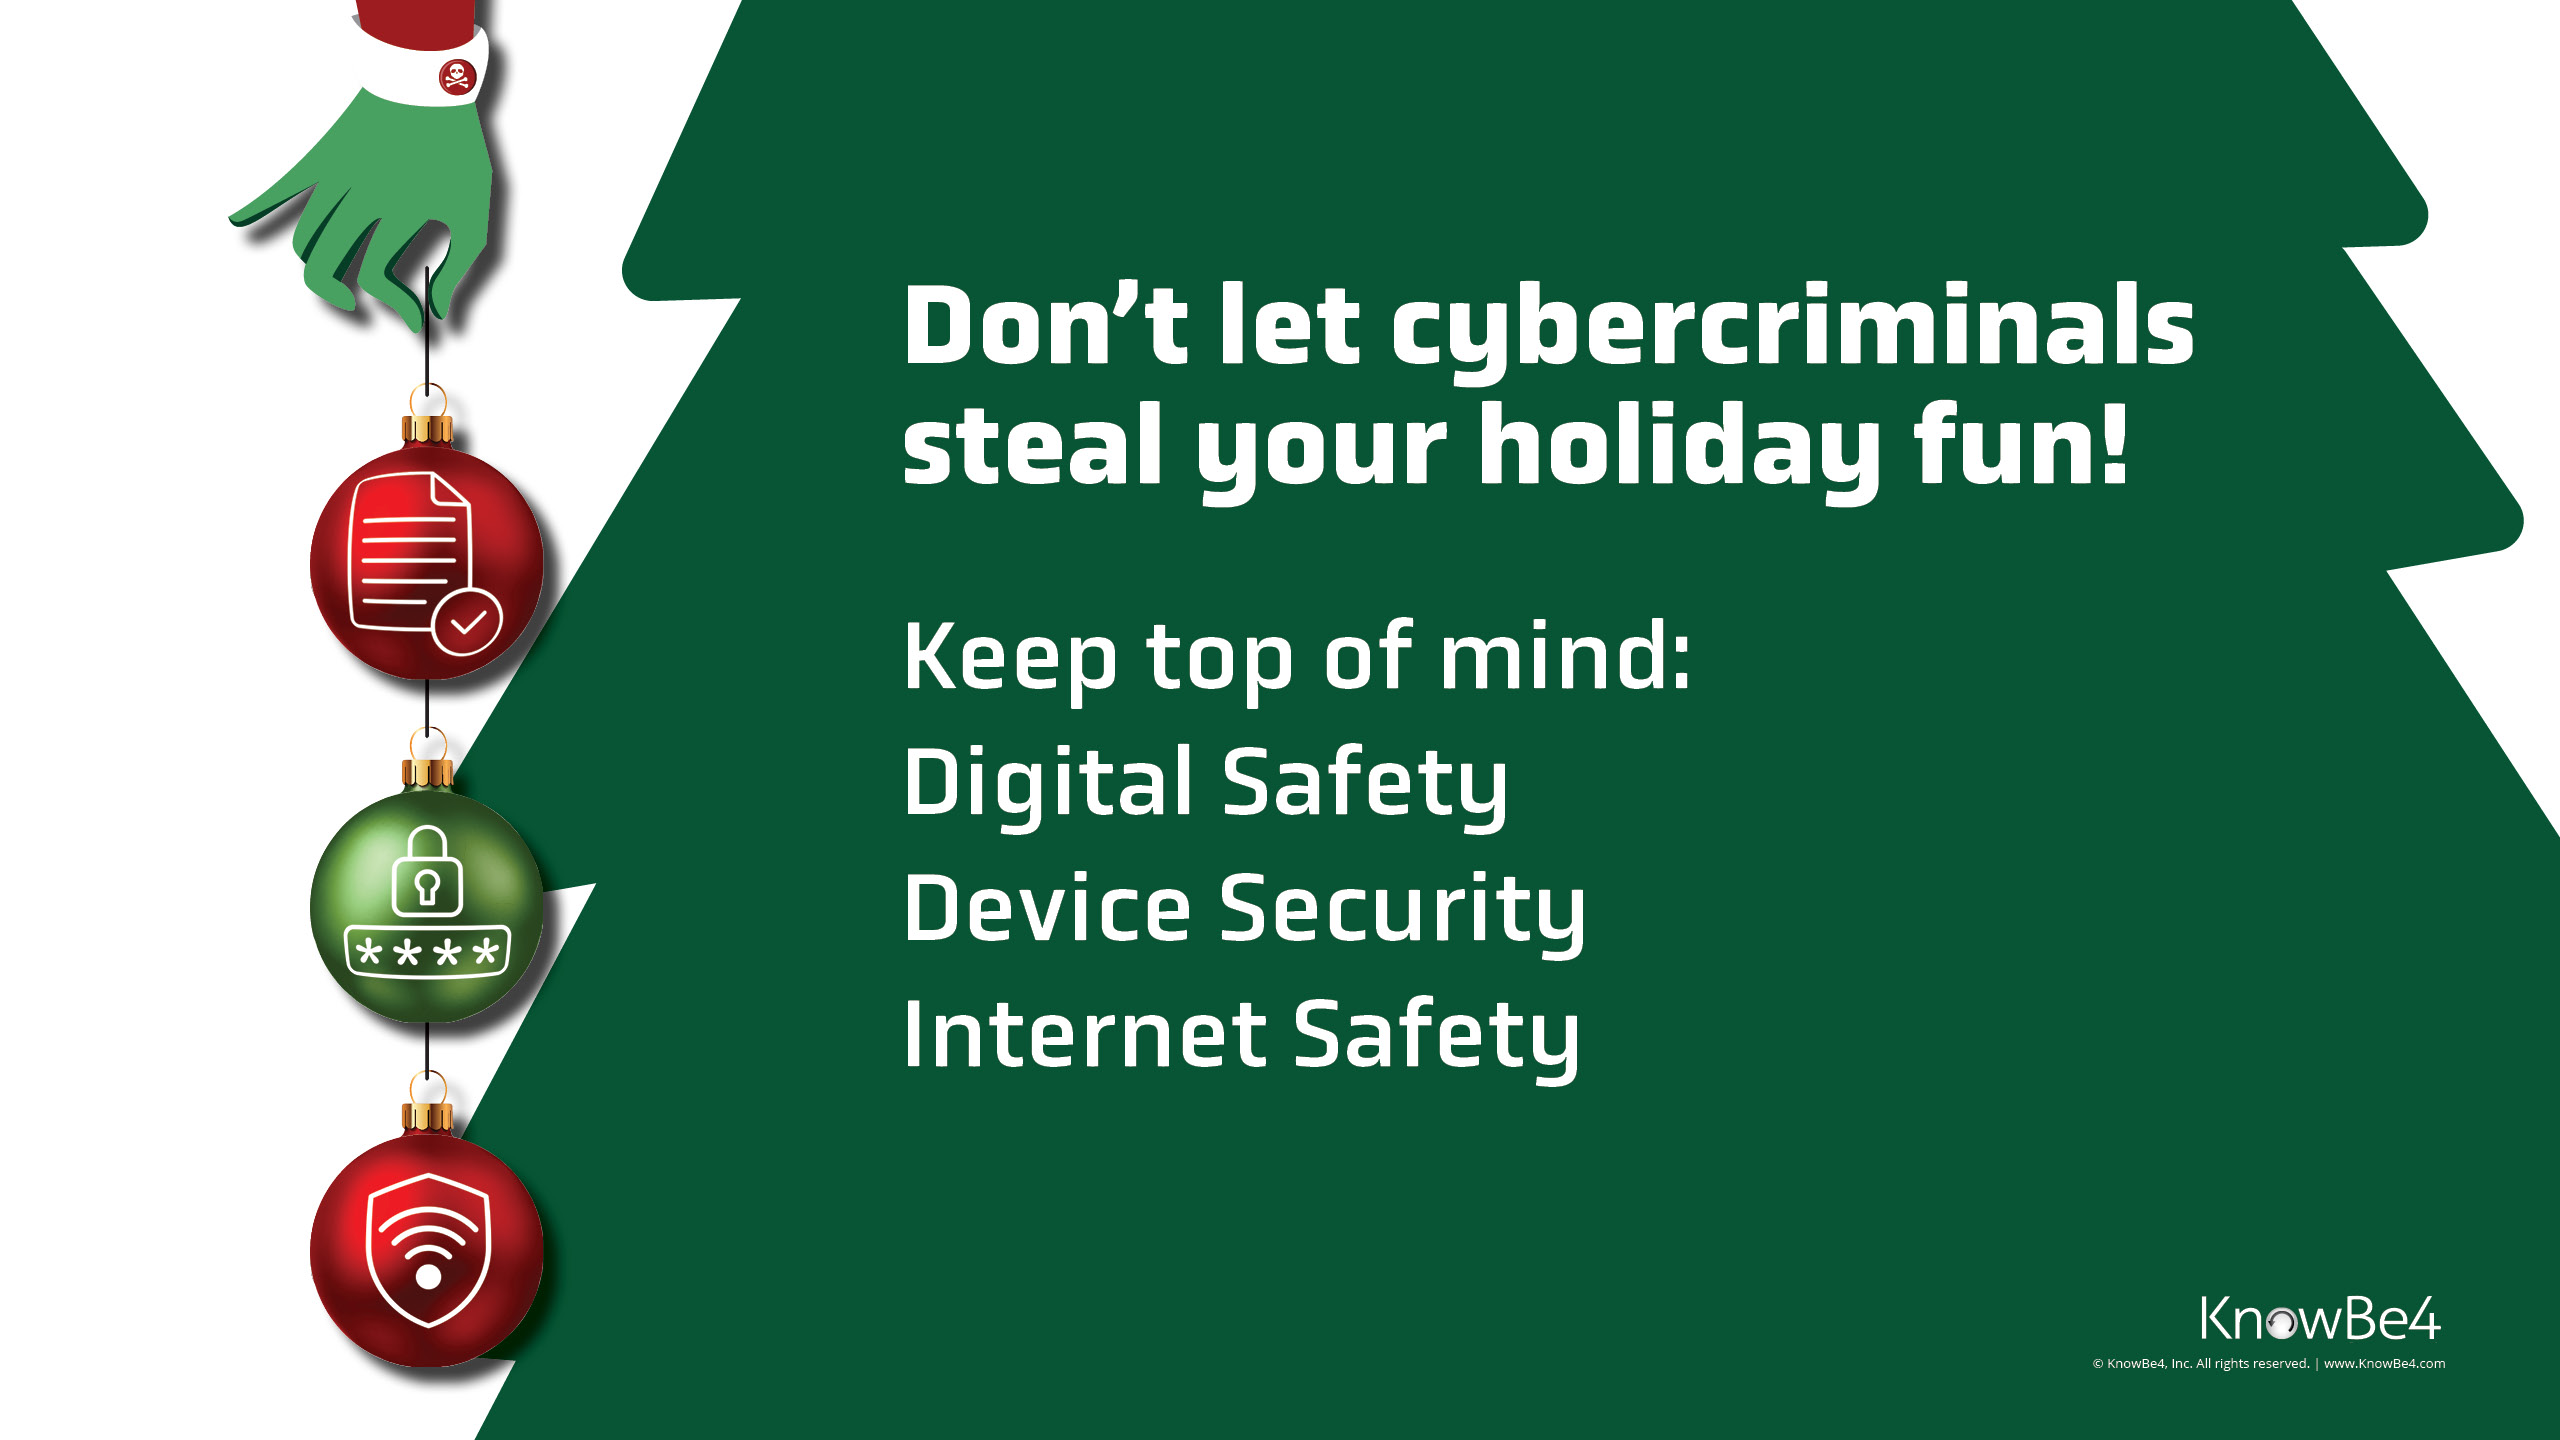 Staying-Safe-For-the-Holidays-Poster_2021_ENUS_DS.jpg